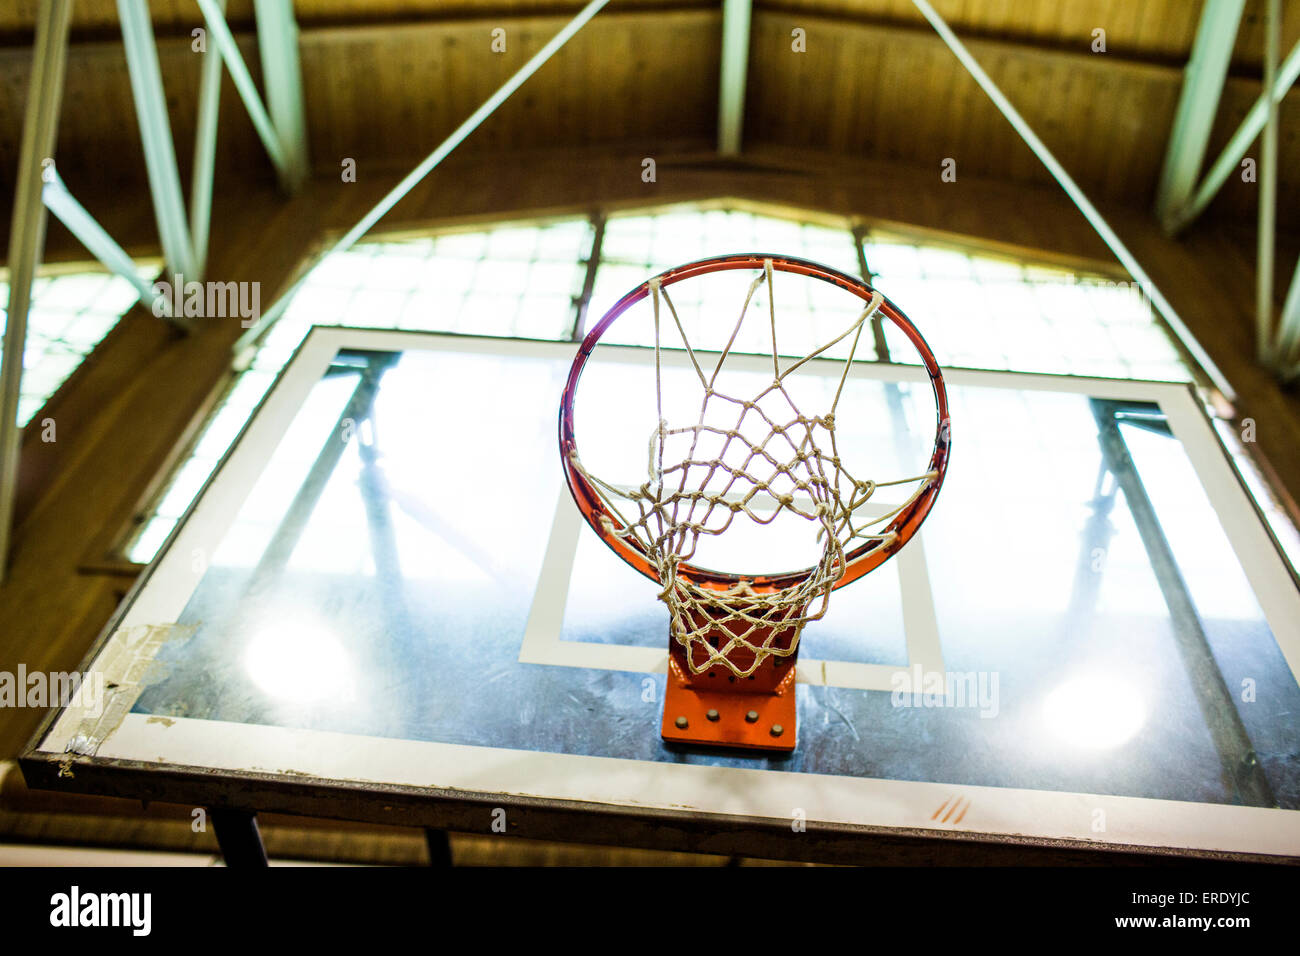 Low angle view of basketball hoop Banque D'Images